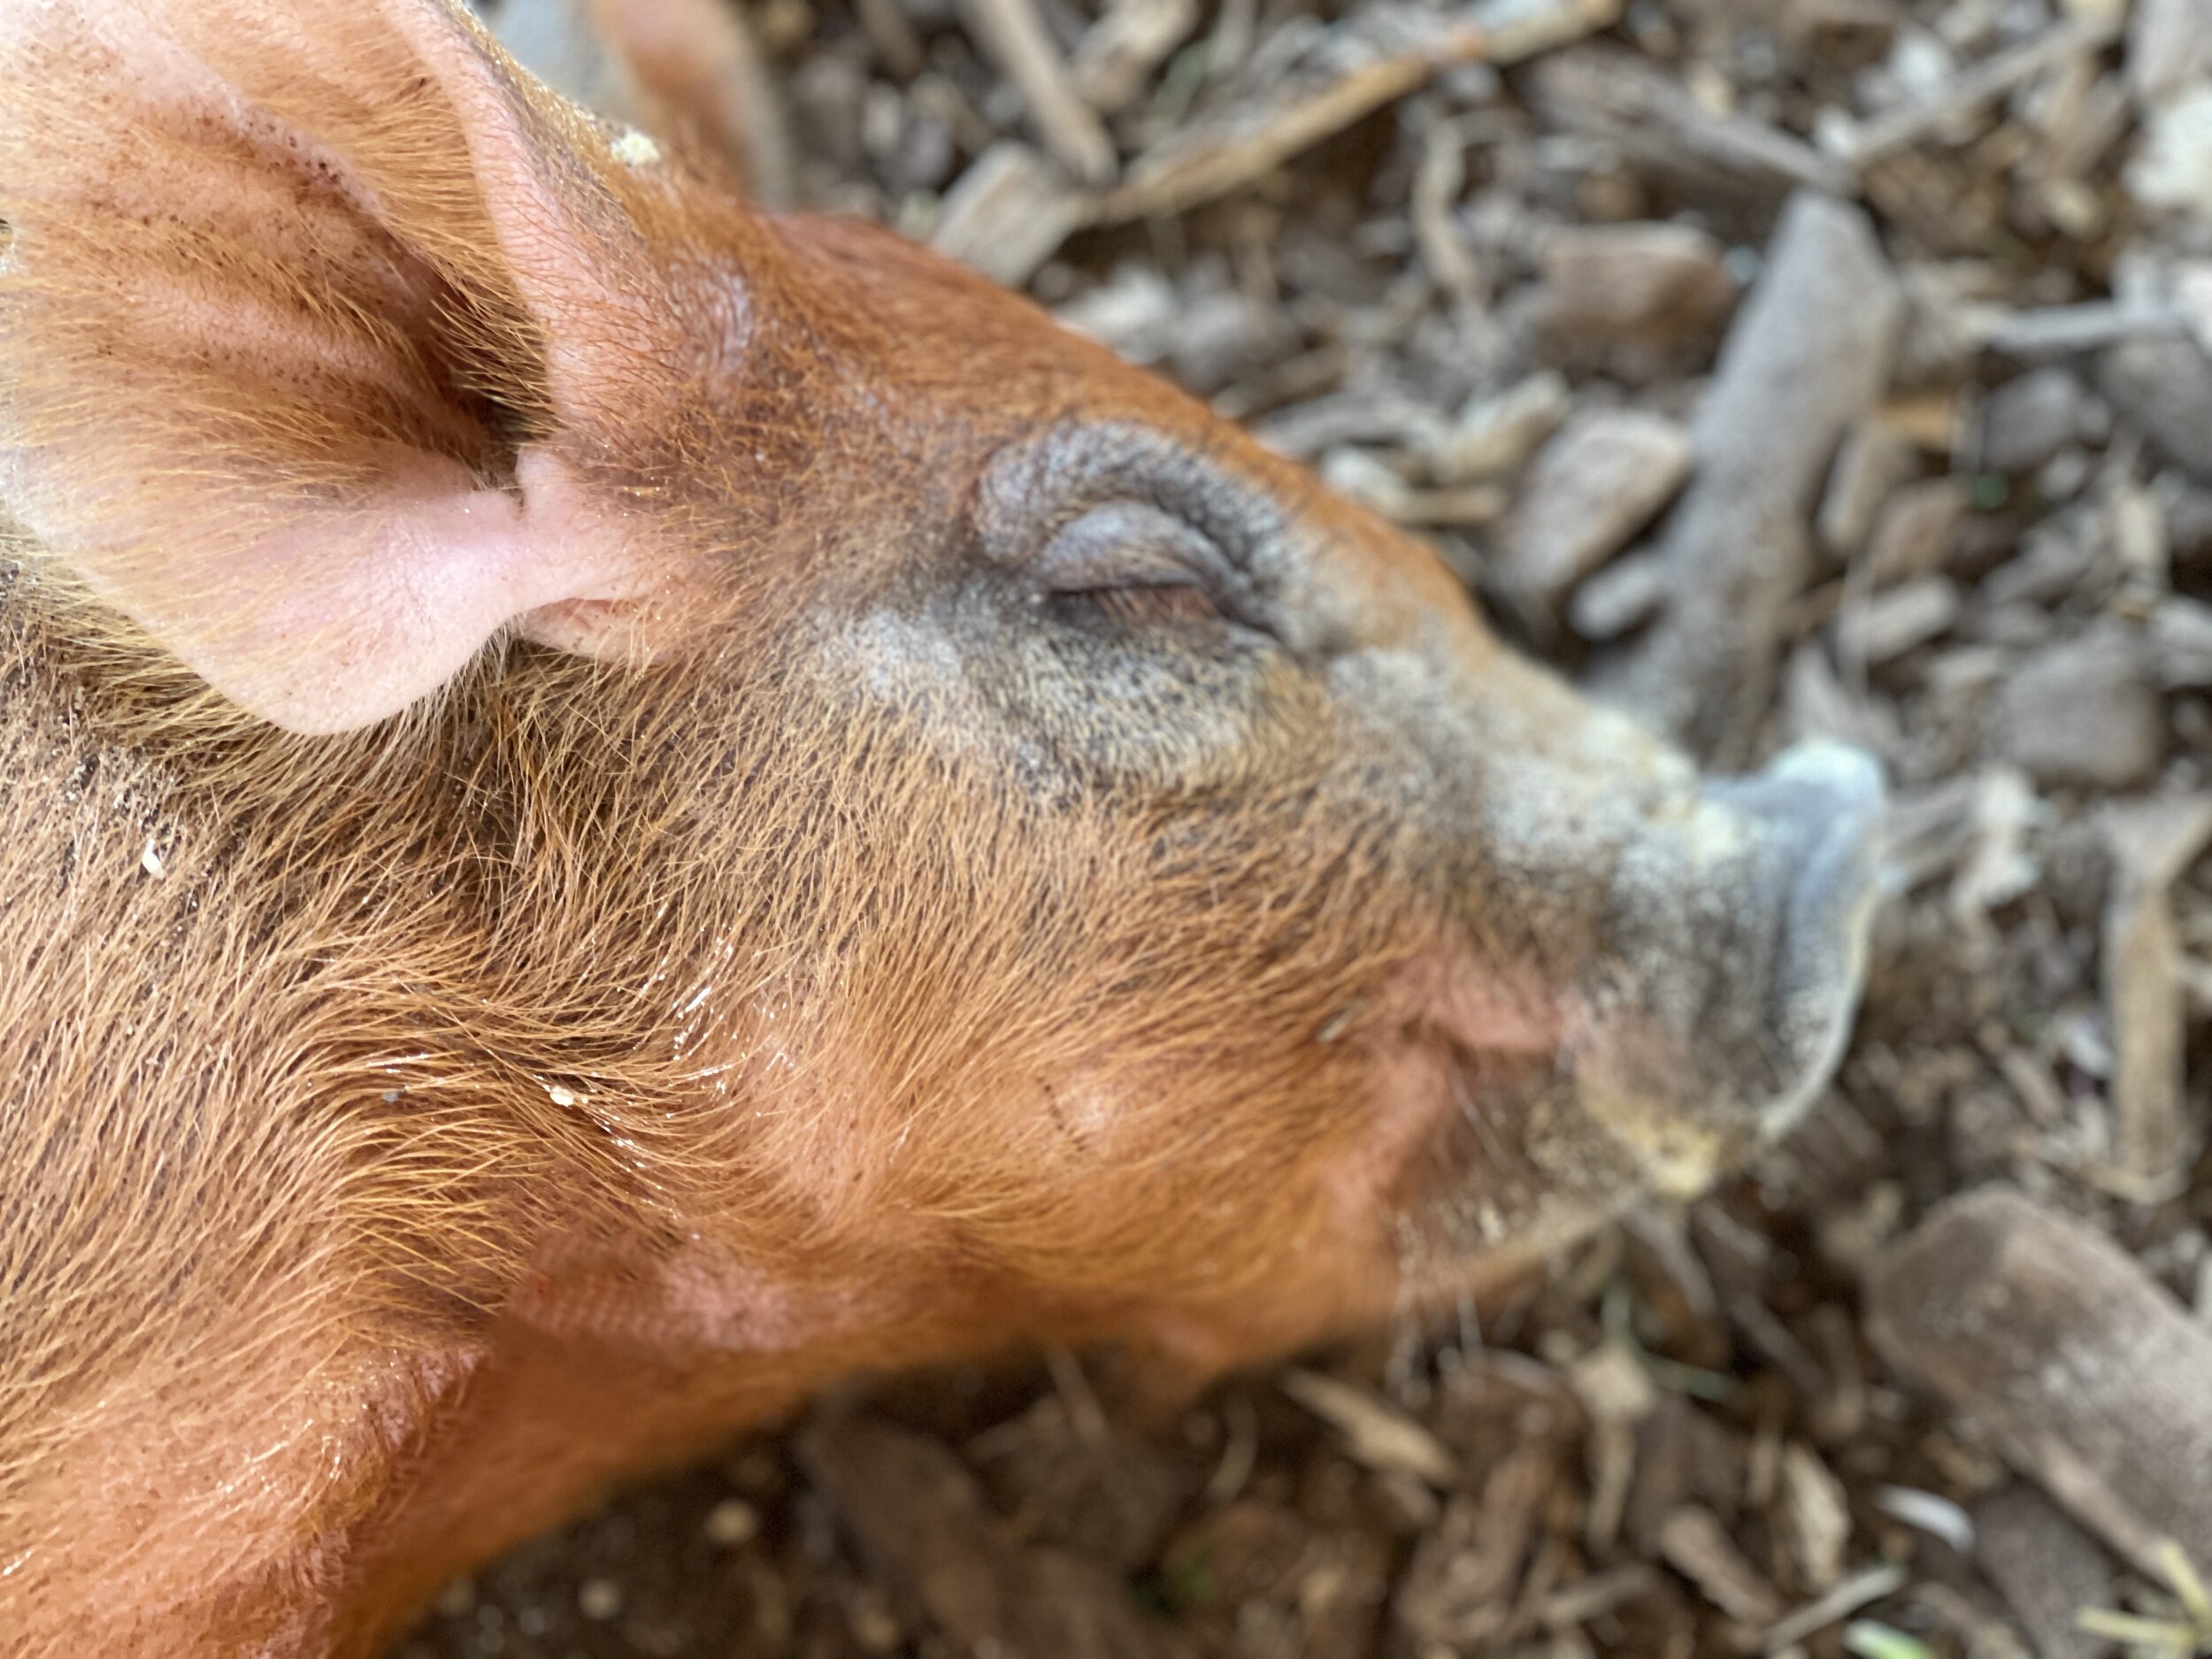  If you know me at all, you know nothing is going to make my day any better than being this close to a sweet, sleeping baby pig!  Thank you, Pond Hill Farms!   🐷 